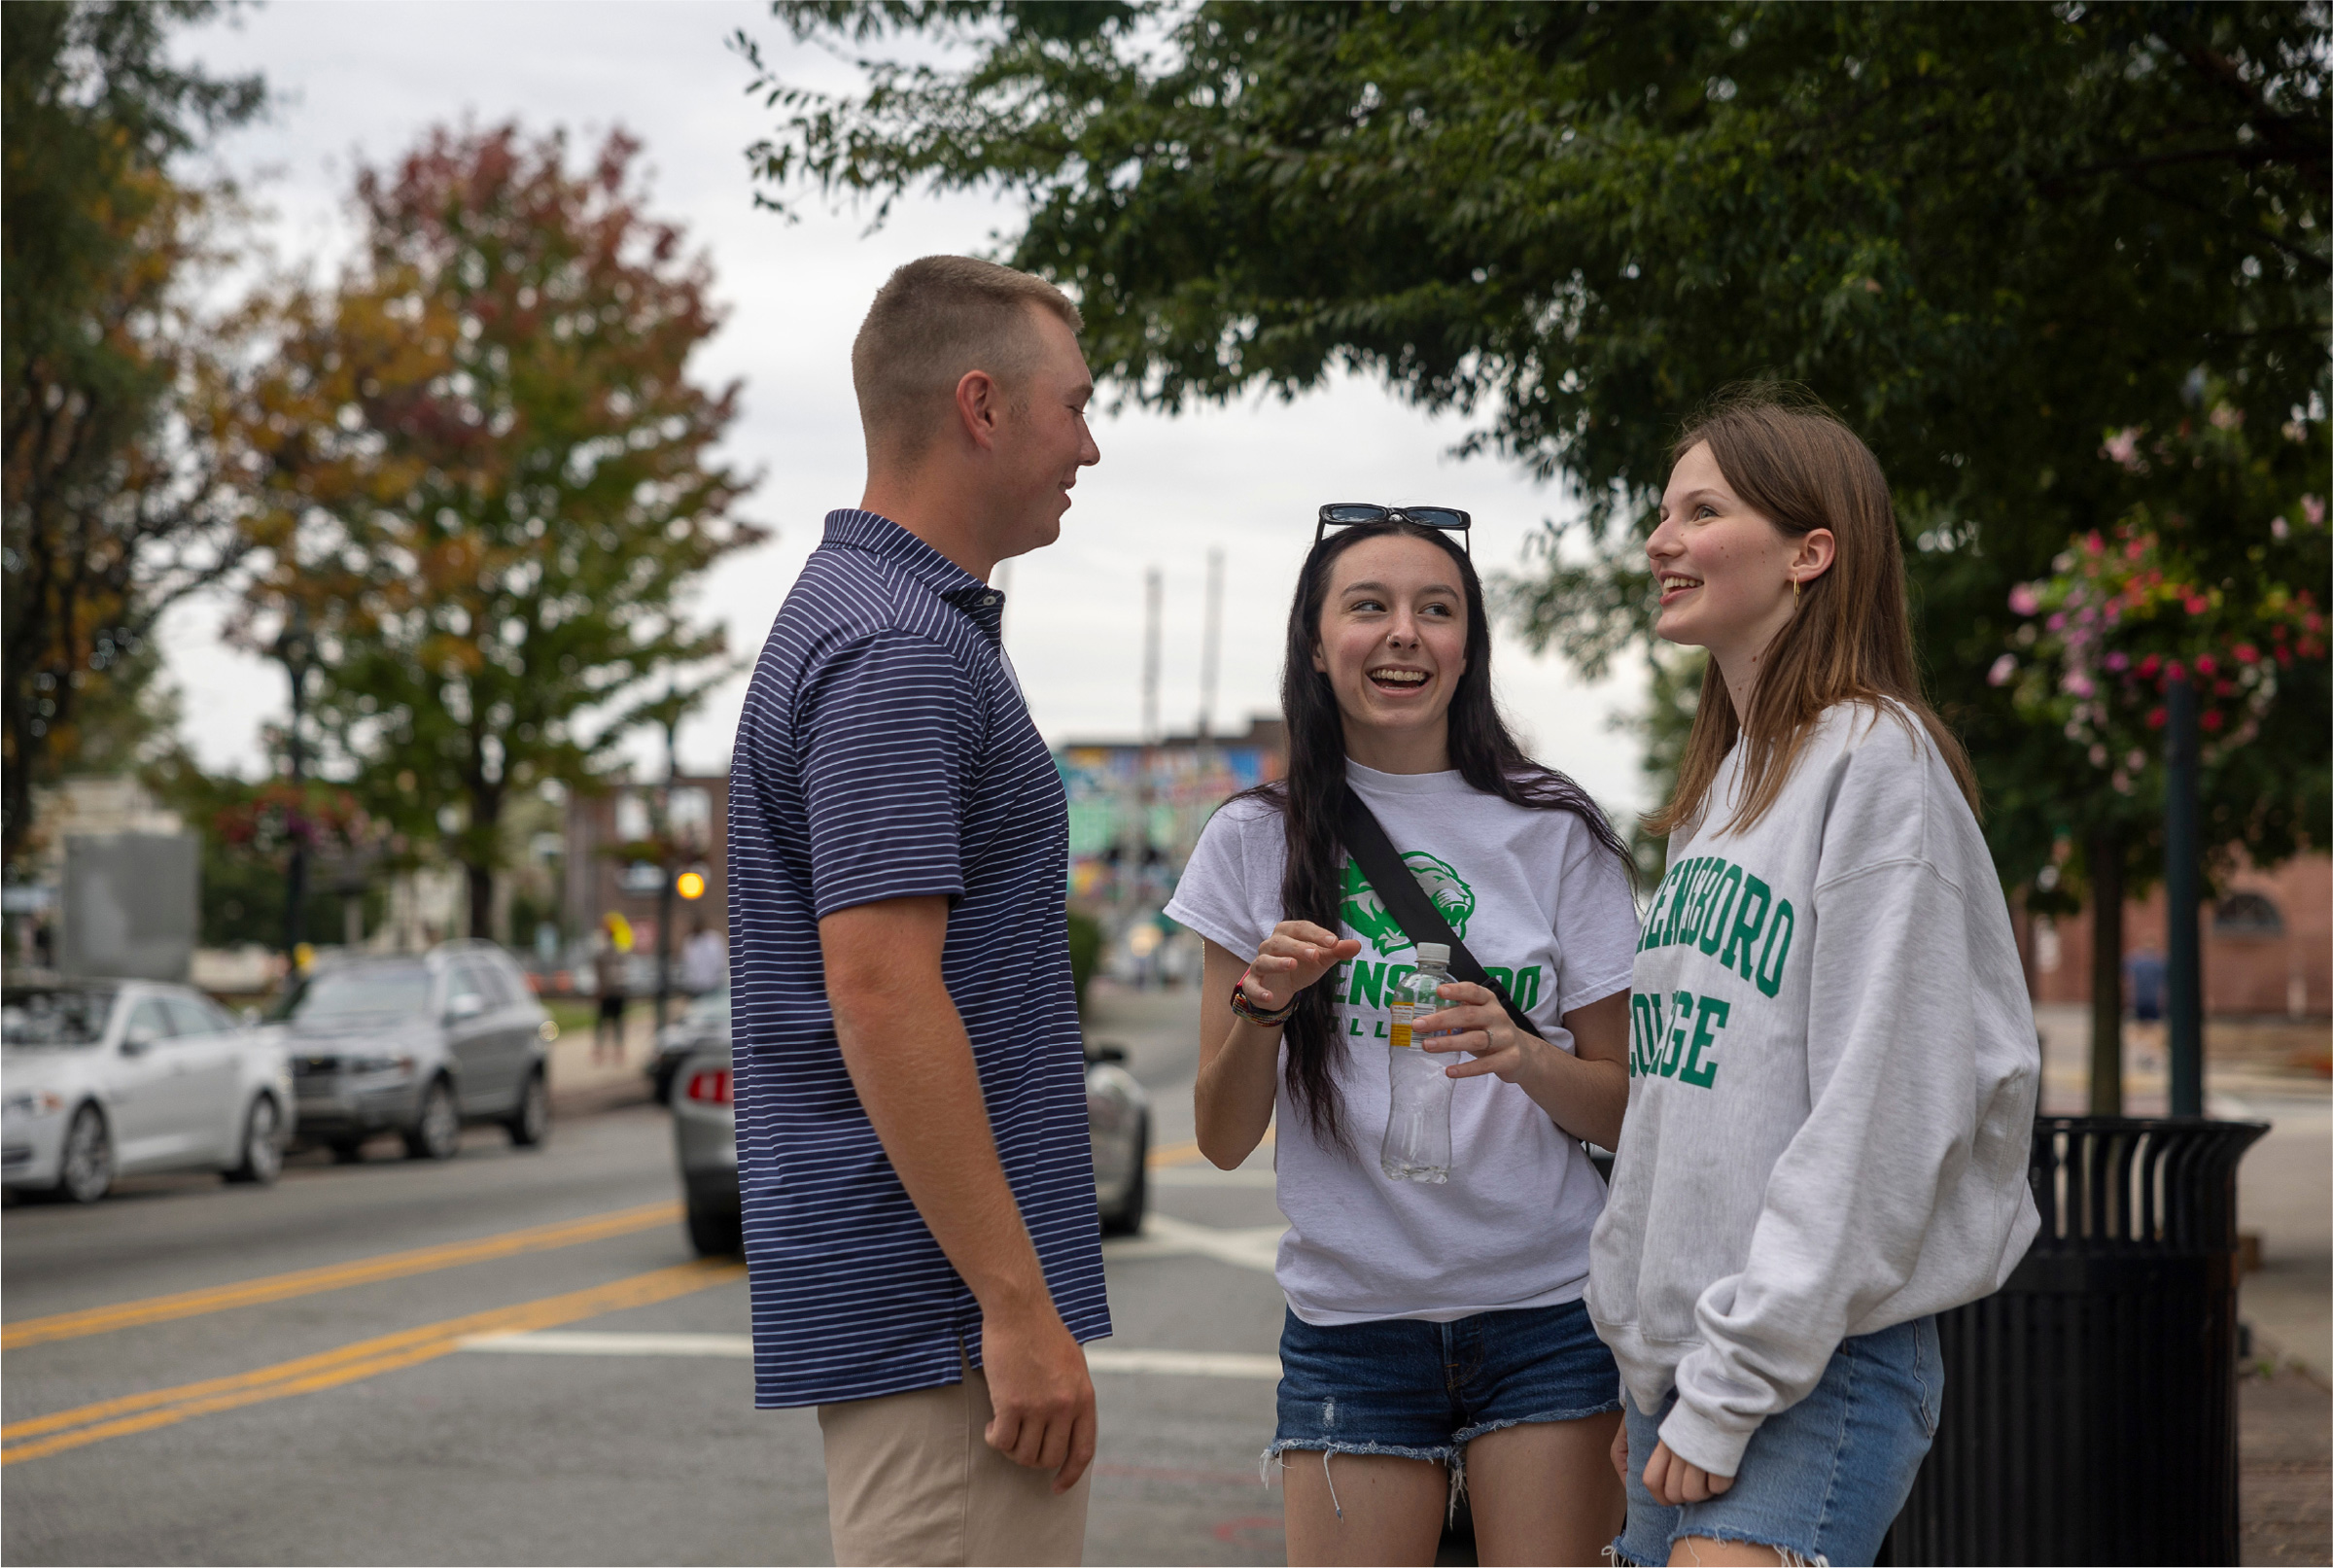 Excited Greensboro College students chatting in a parking lot